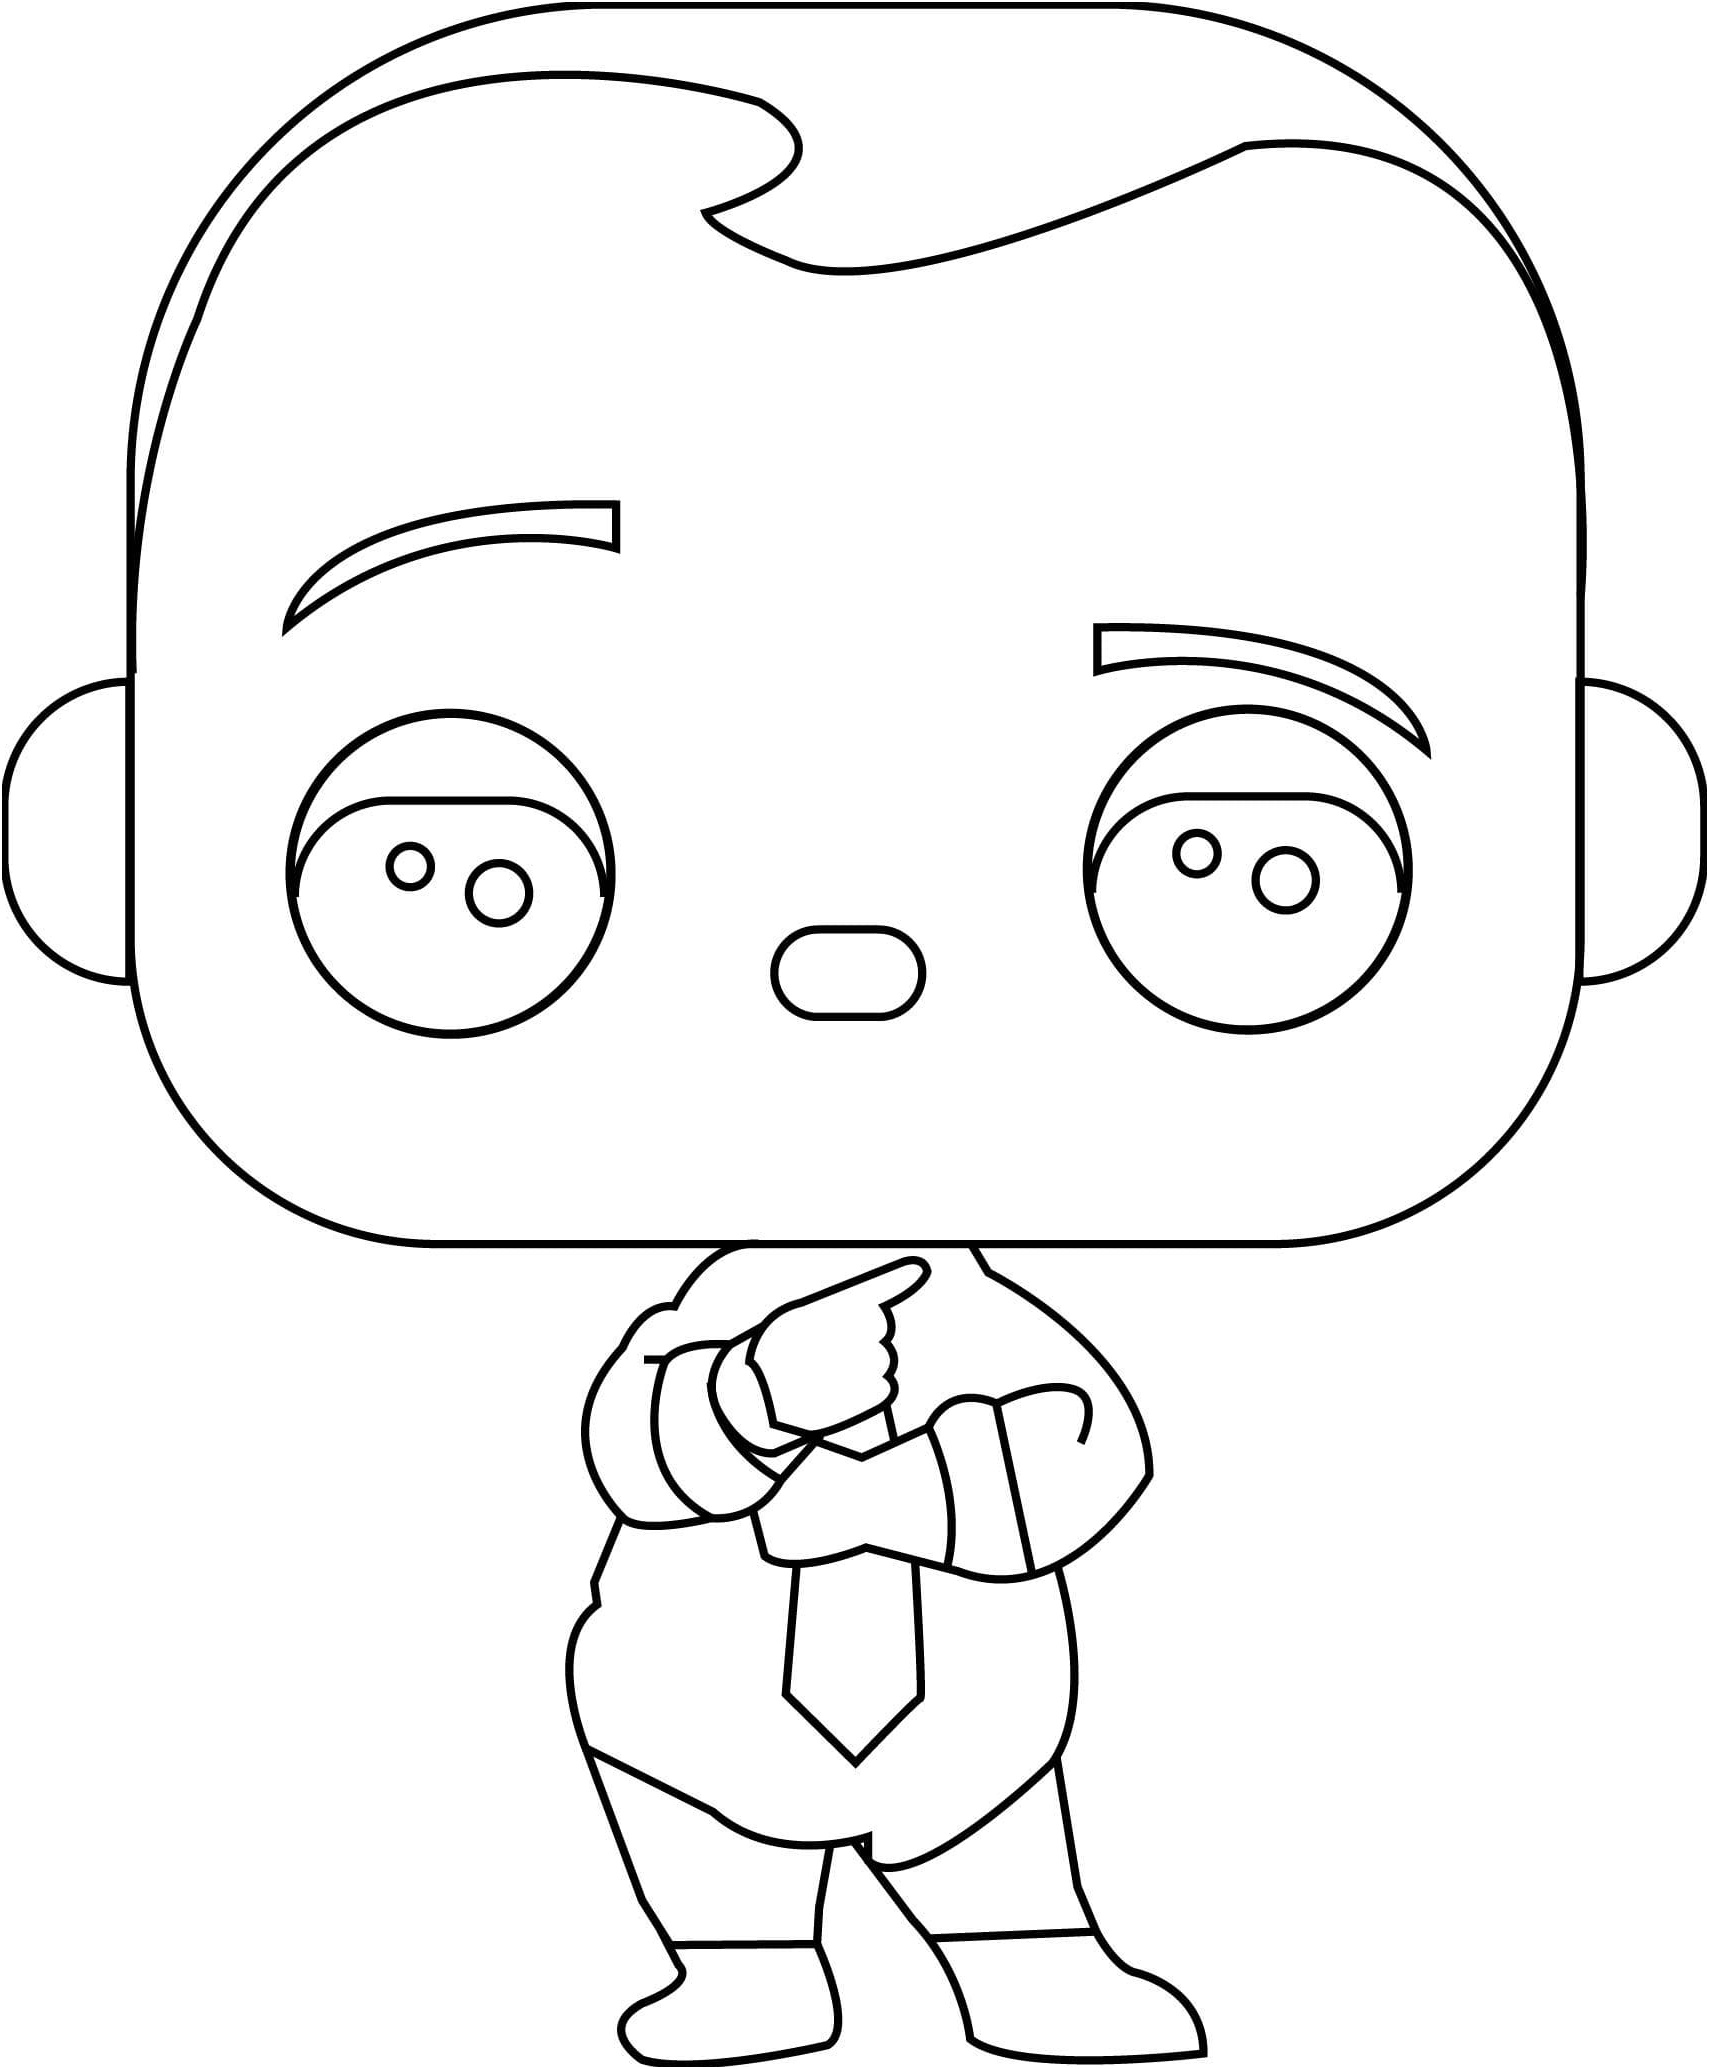 coloring pages funko pop print popular character figures